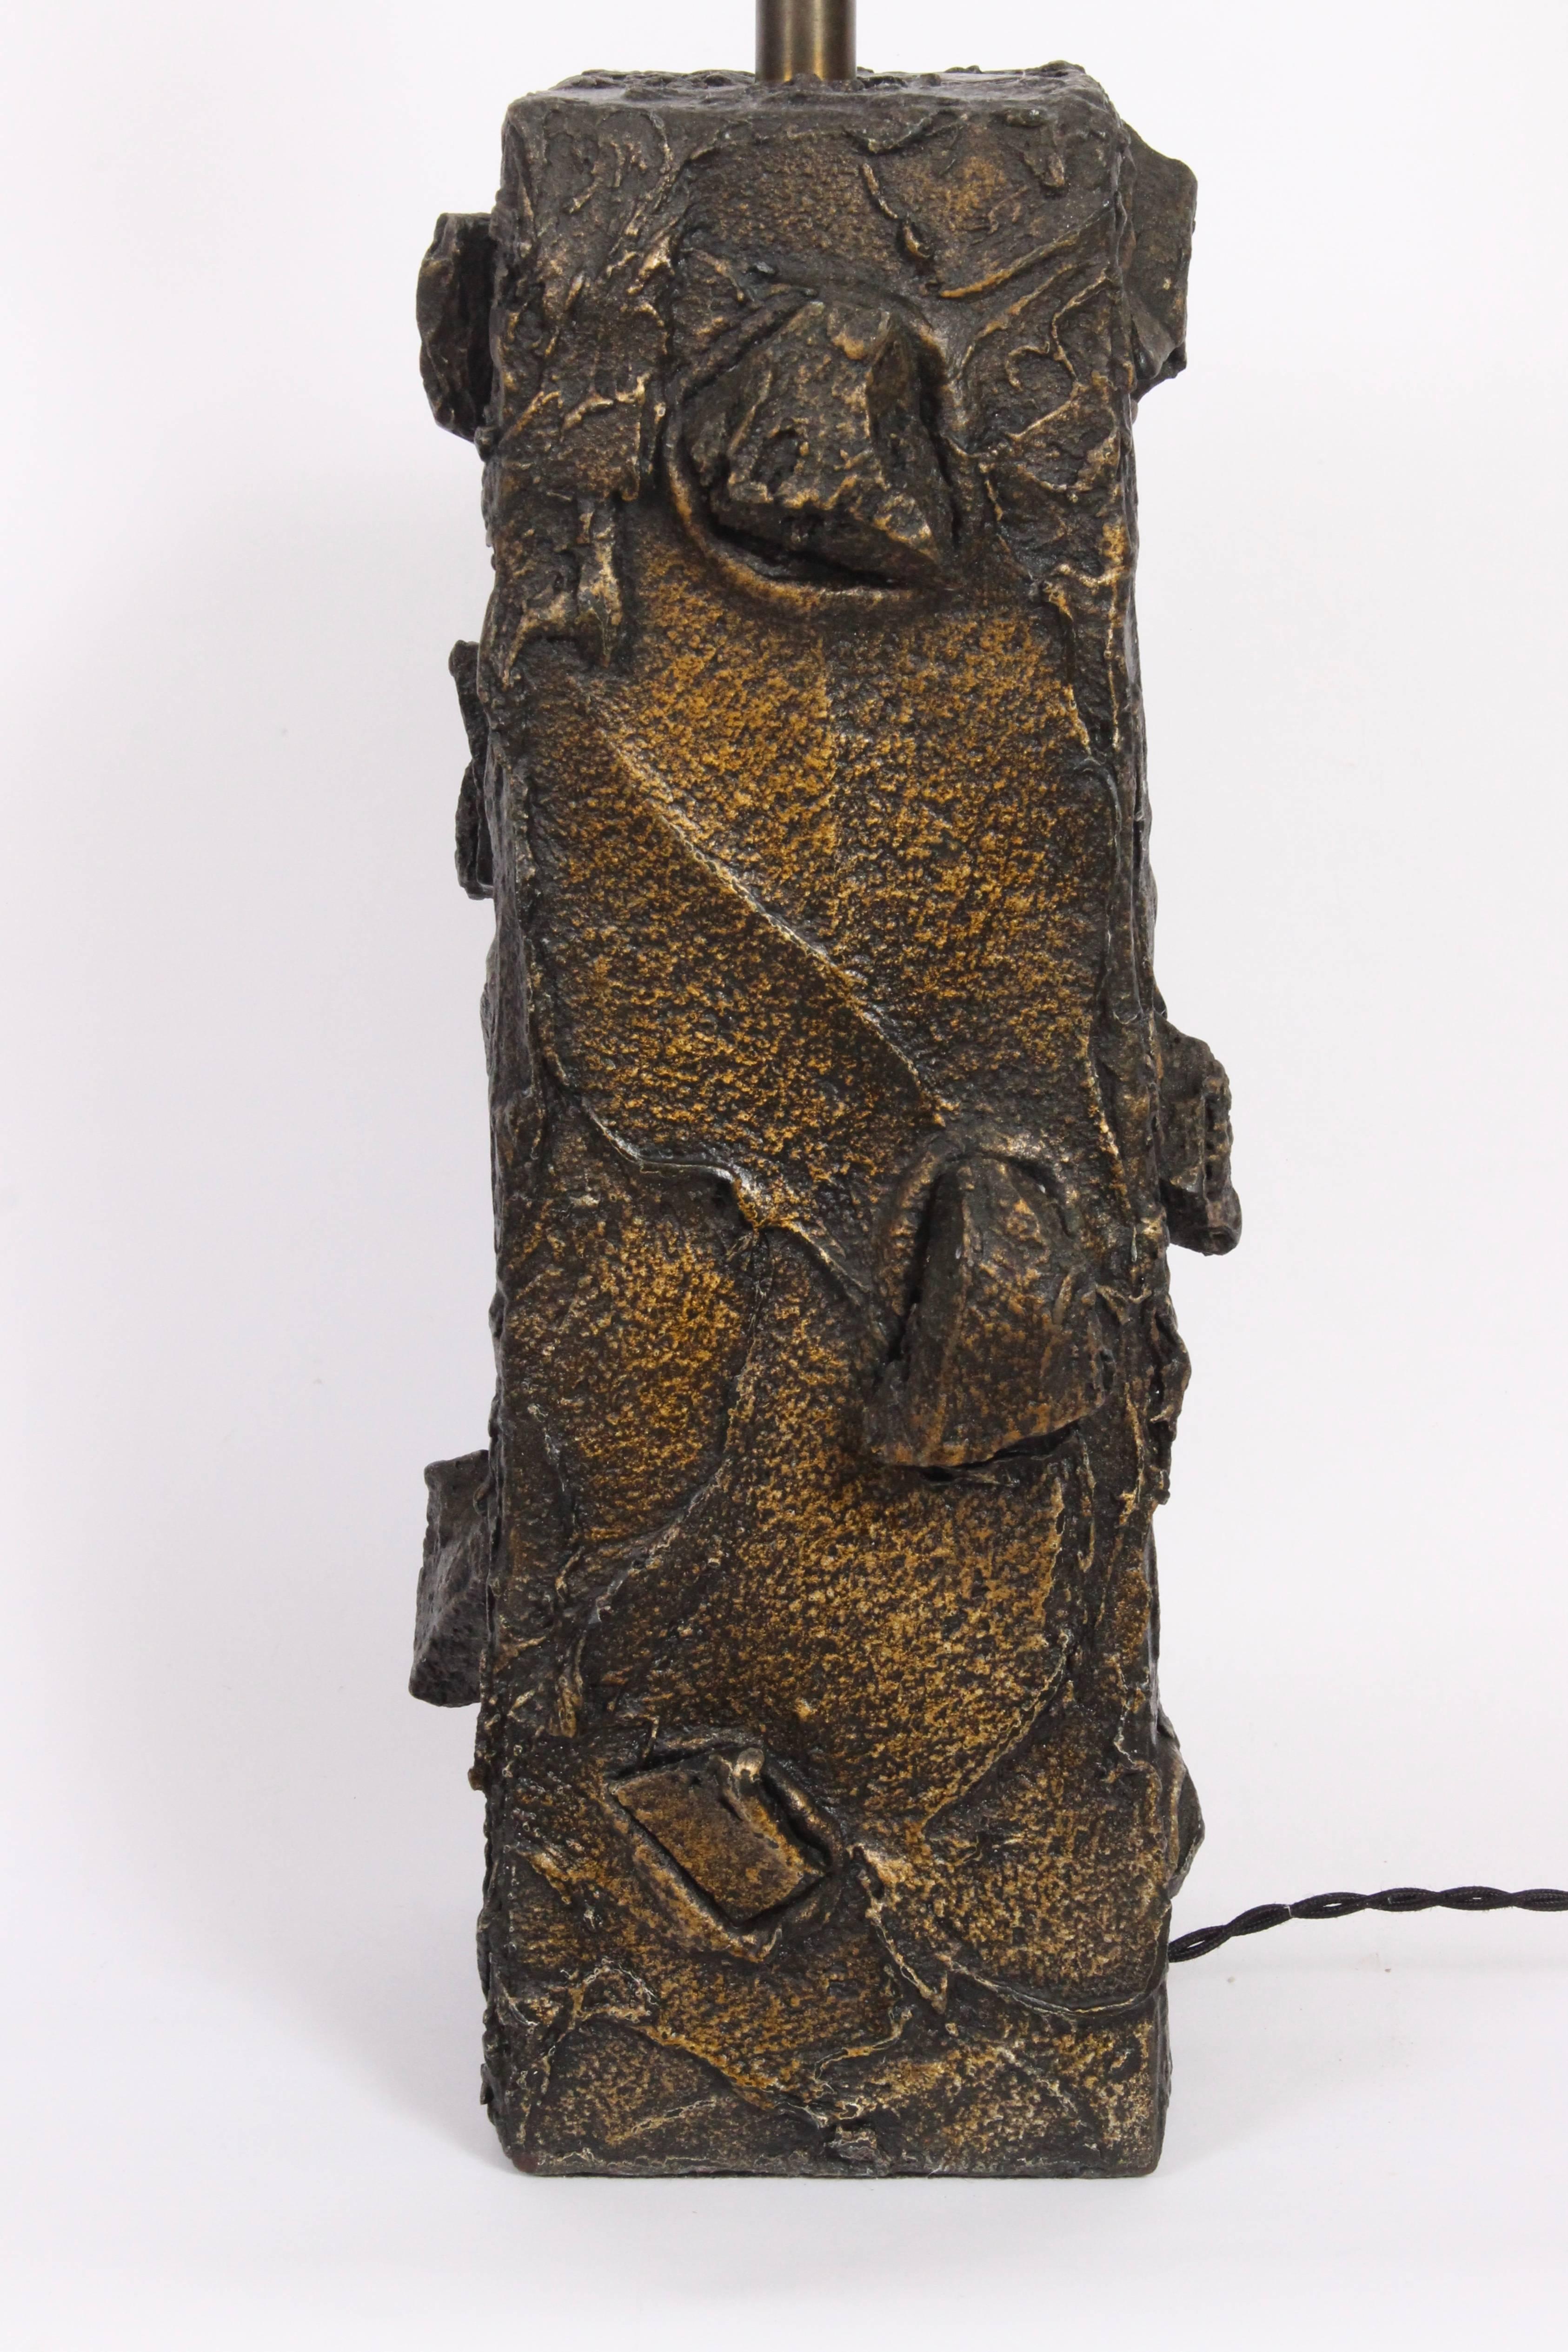 Paul Evans Sculpted Bronze Resin Relief Brutalist Table Lamp, Early 1960s 2